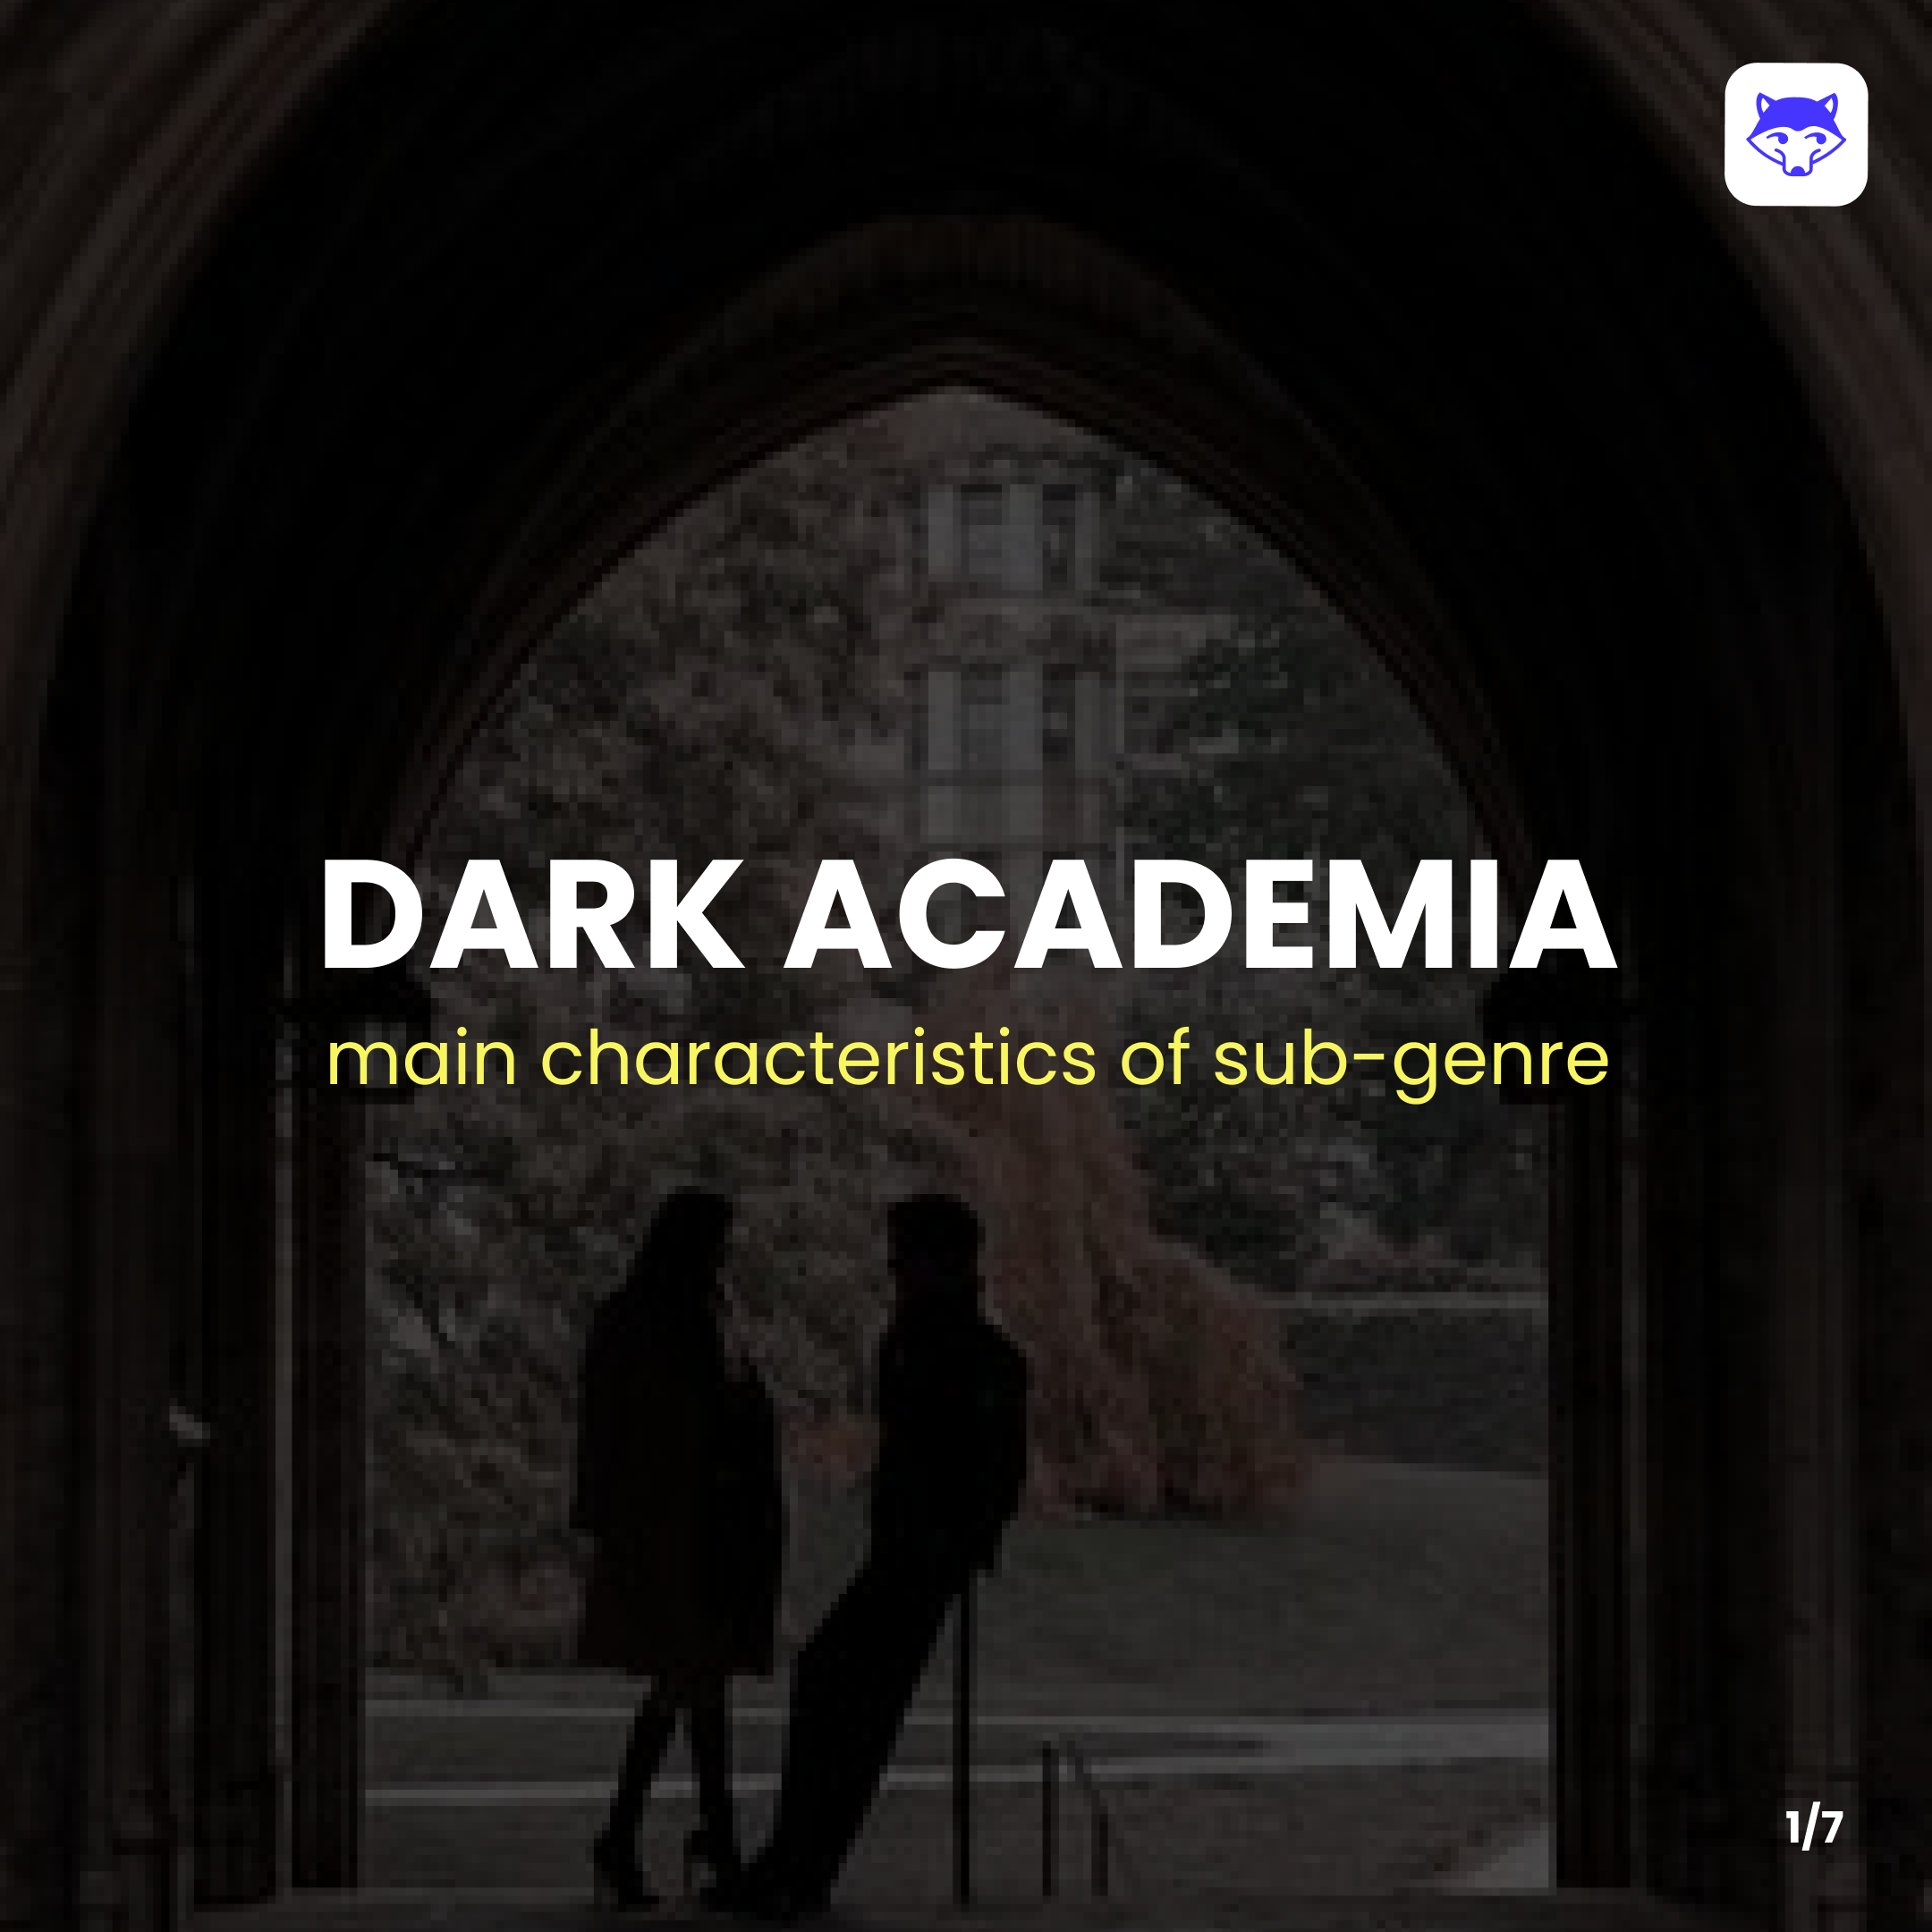 Dark Academia: what this sub-genre is about